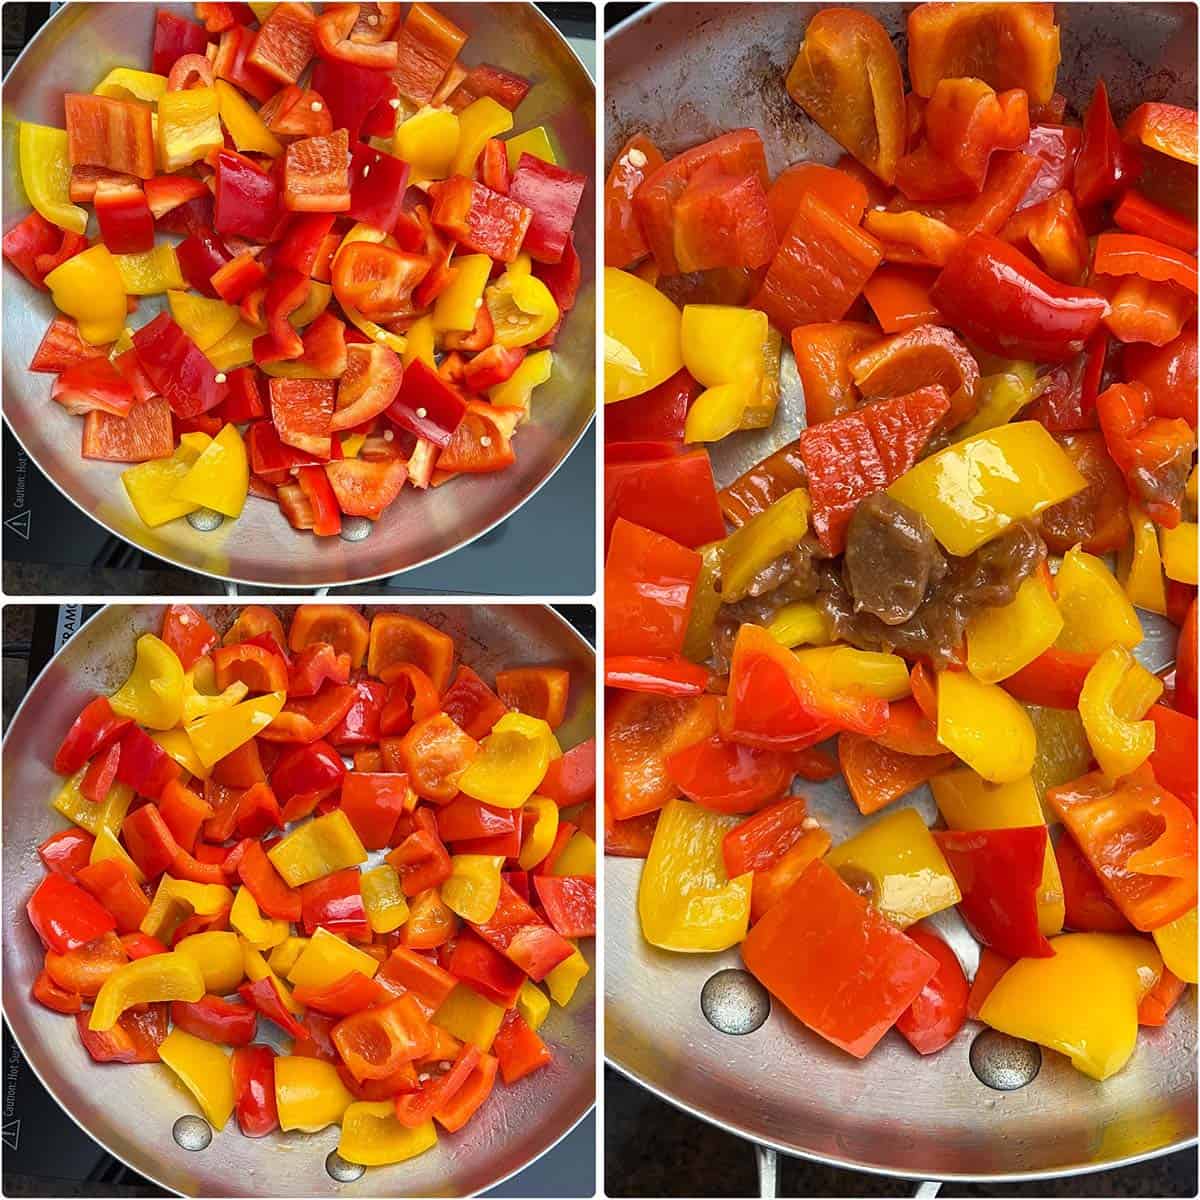 3 panel photo showing the sautéing of bell pepper.